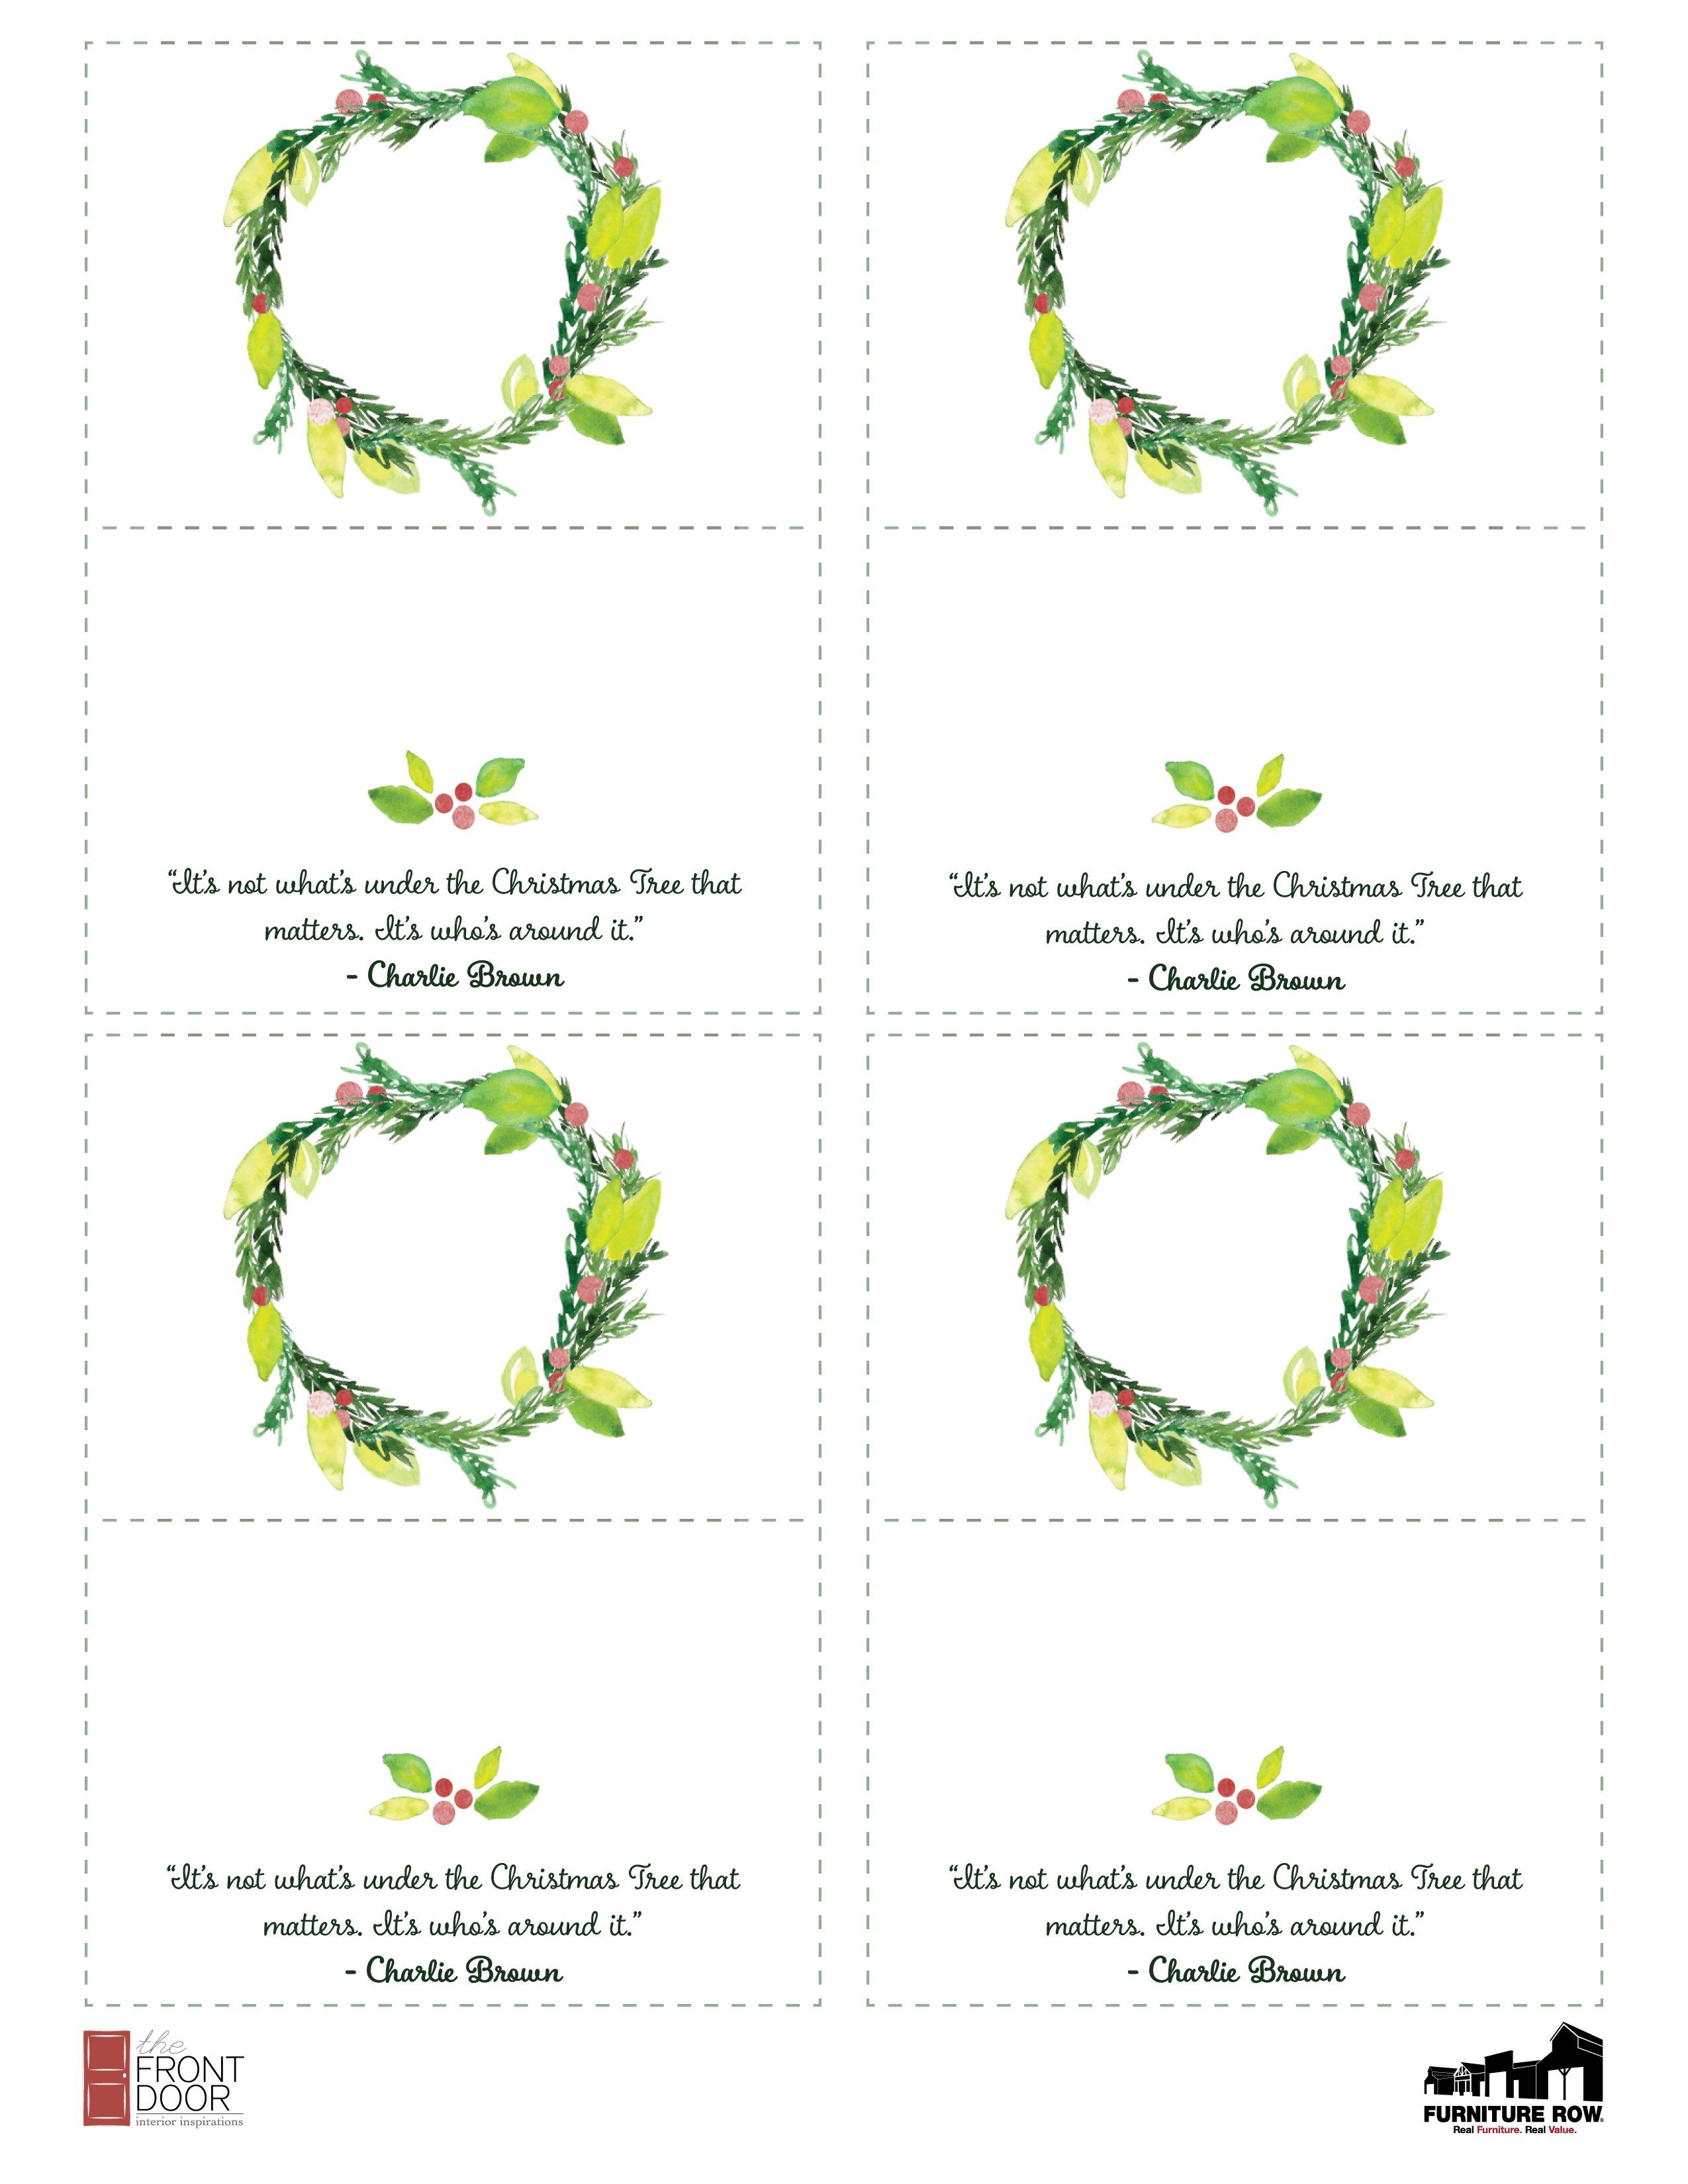 Printable Christmas Place Name Cards For The Table | Holiday - Christmas Table Name Cards Free Printable